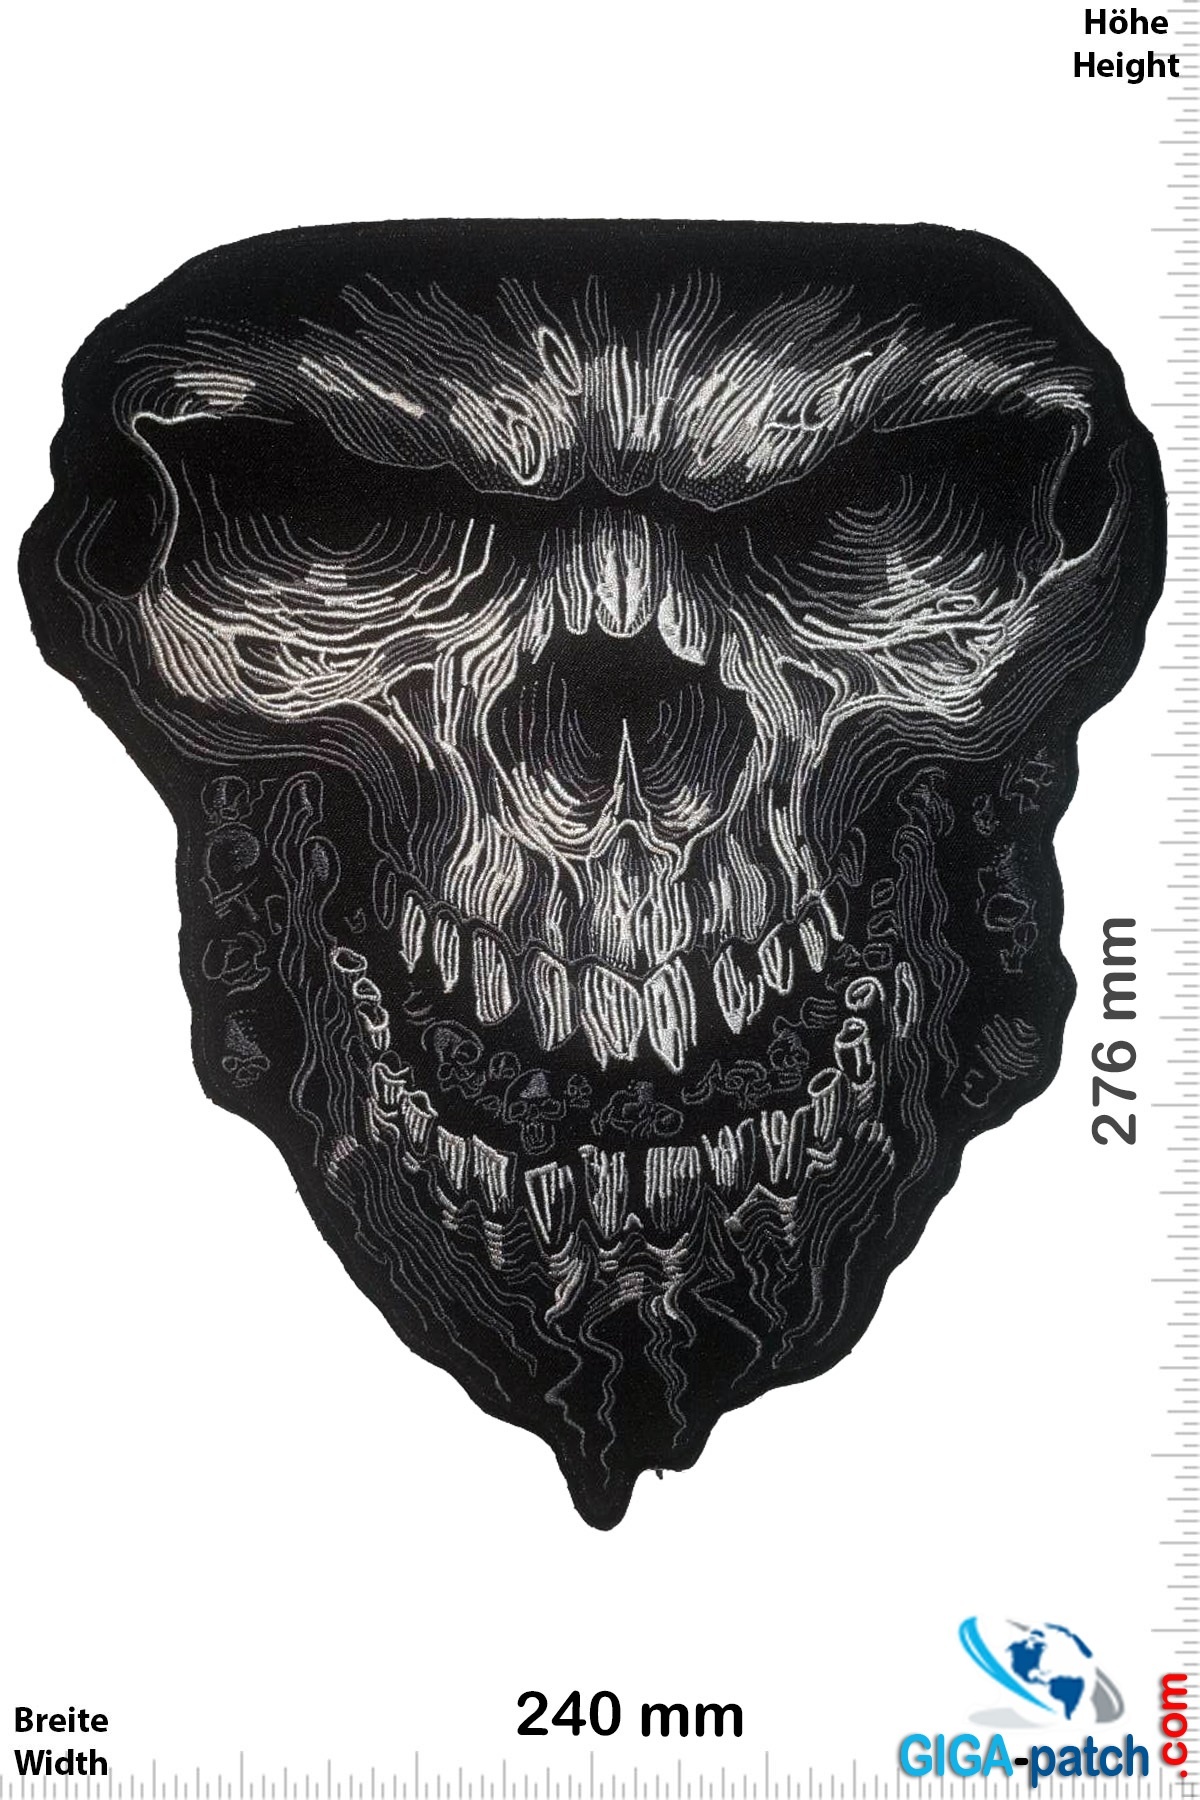 Totenkopf - Totenkopf Skull Ghost -27 cm- Patch - Back Patches